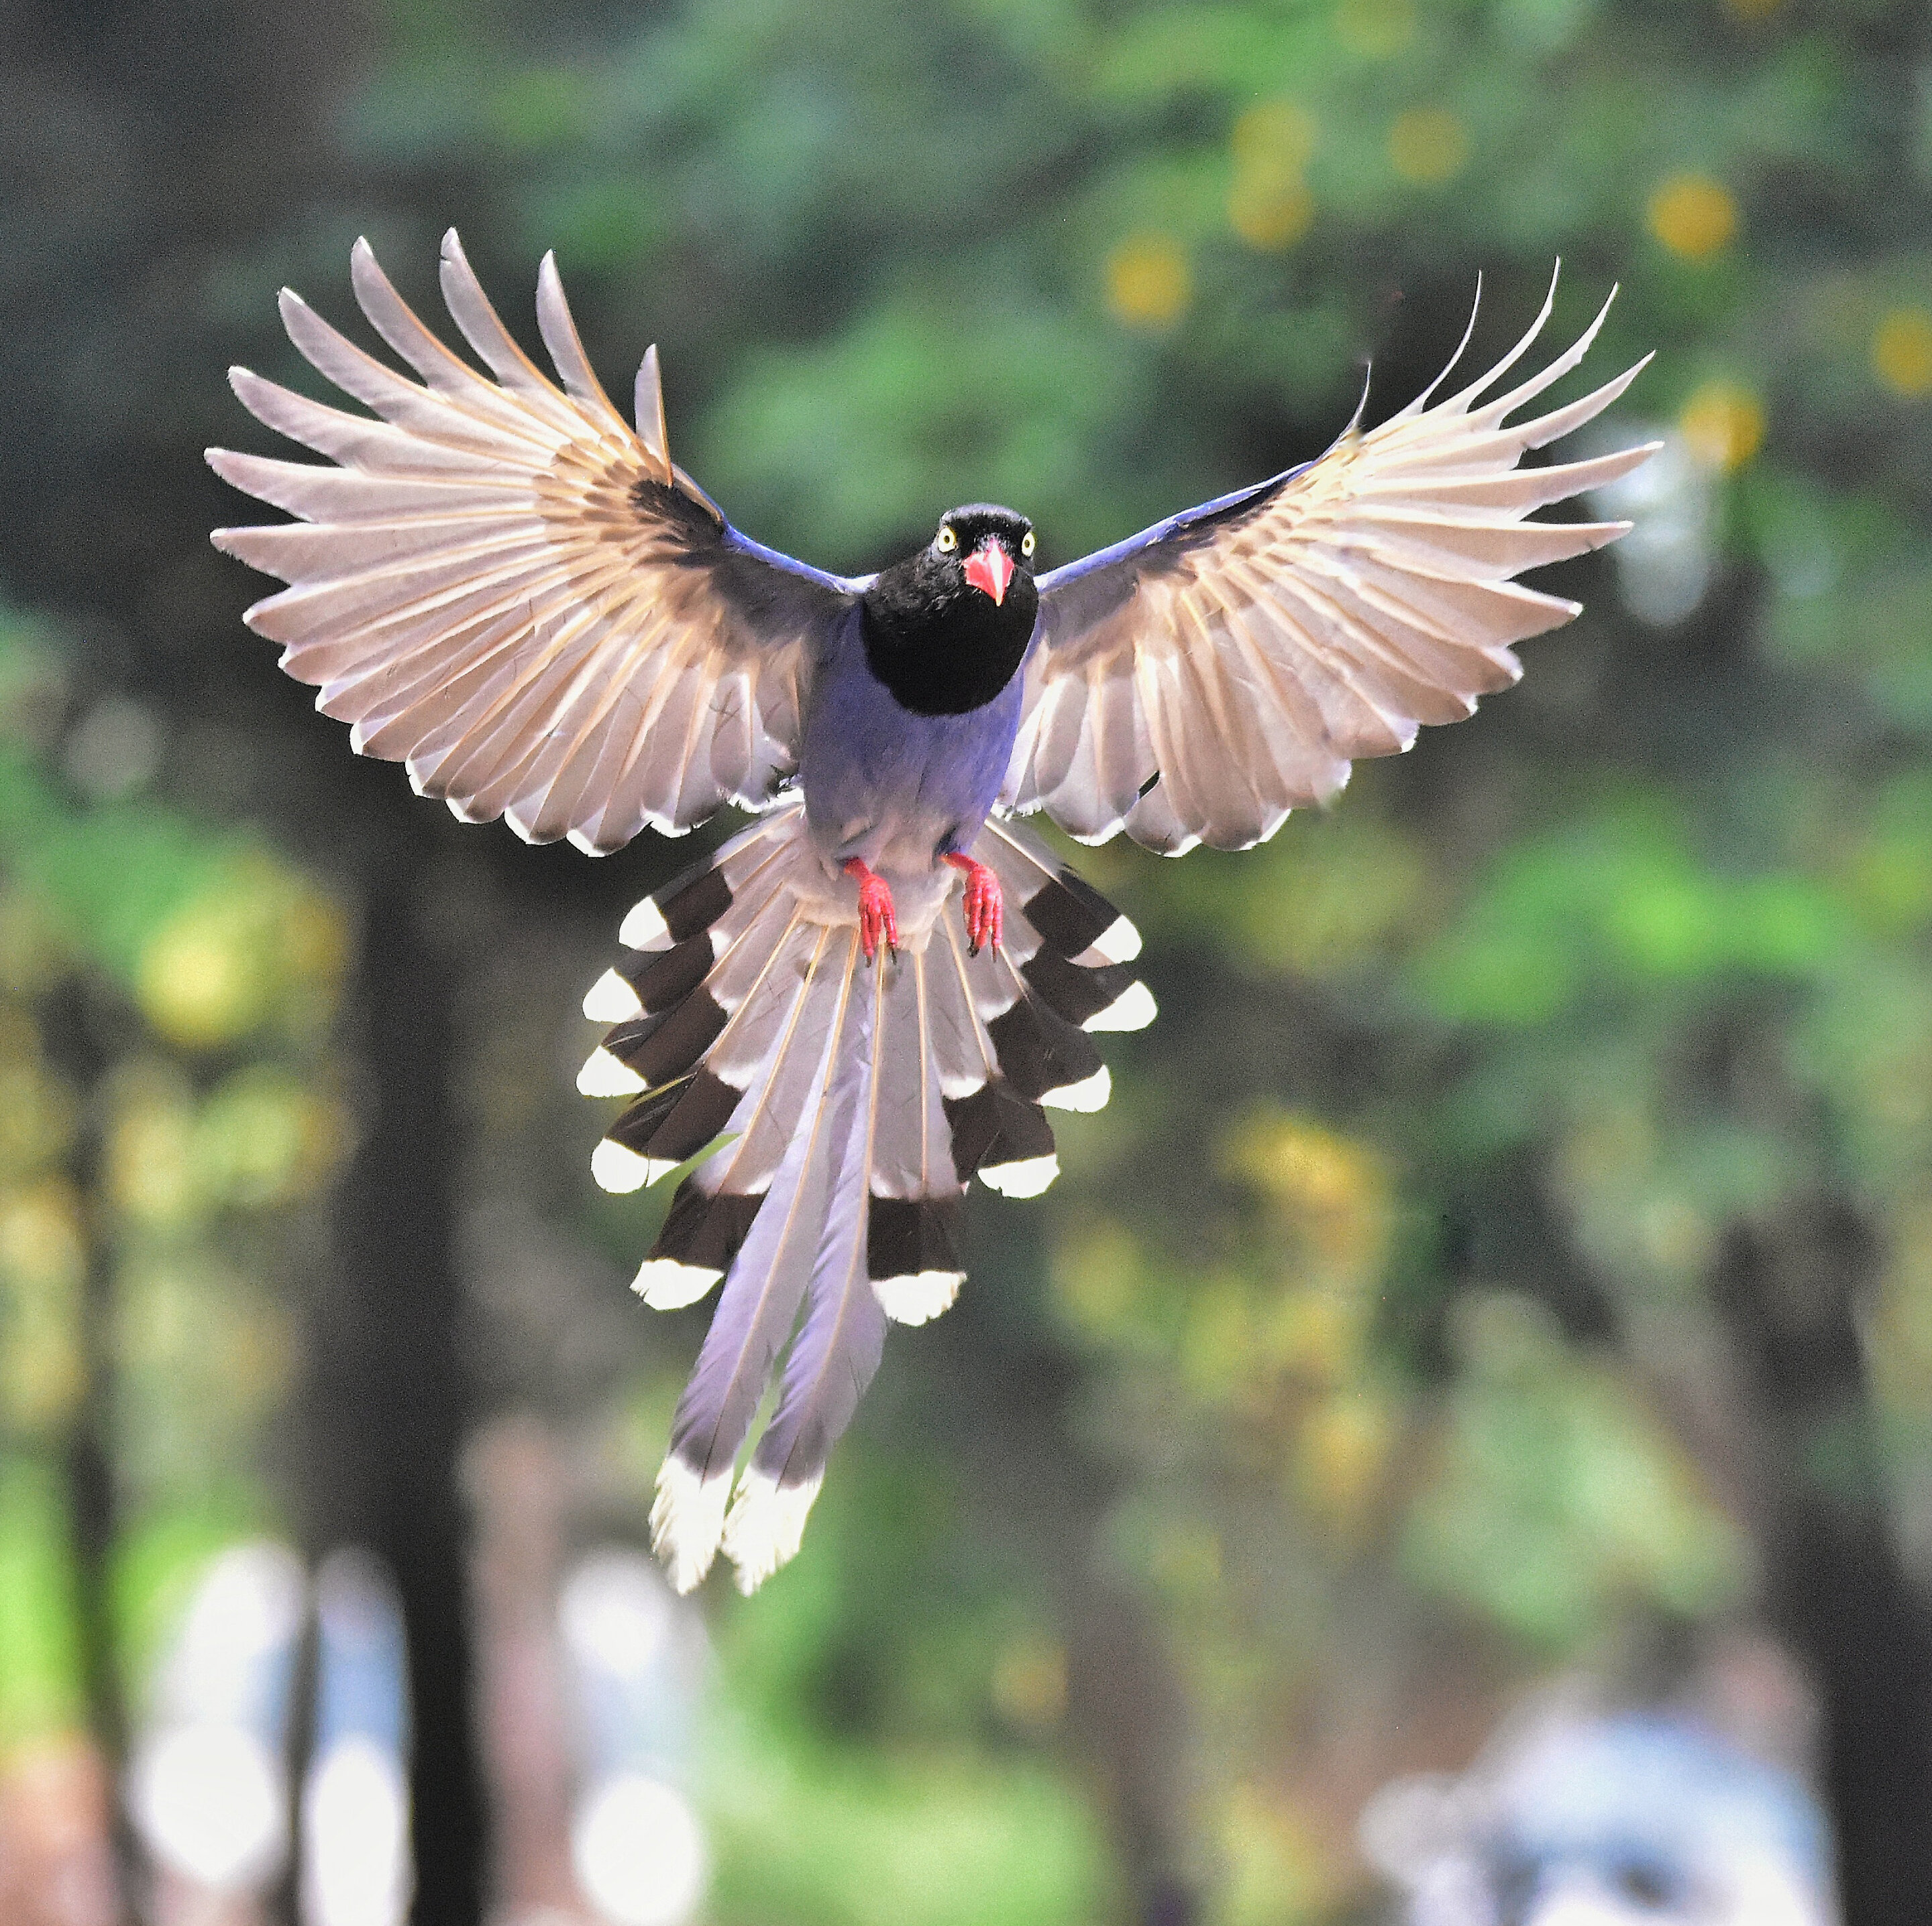 Researchers show how feathers propel birds through air and history